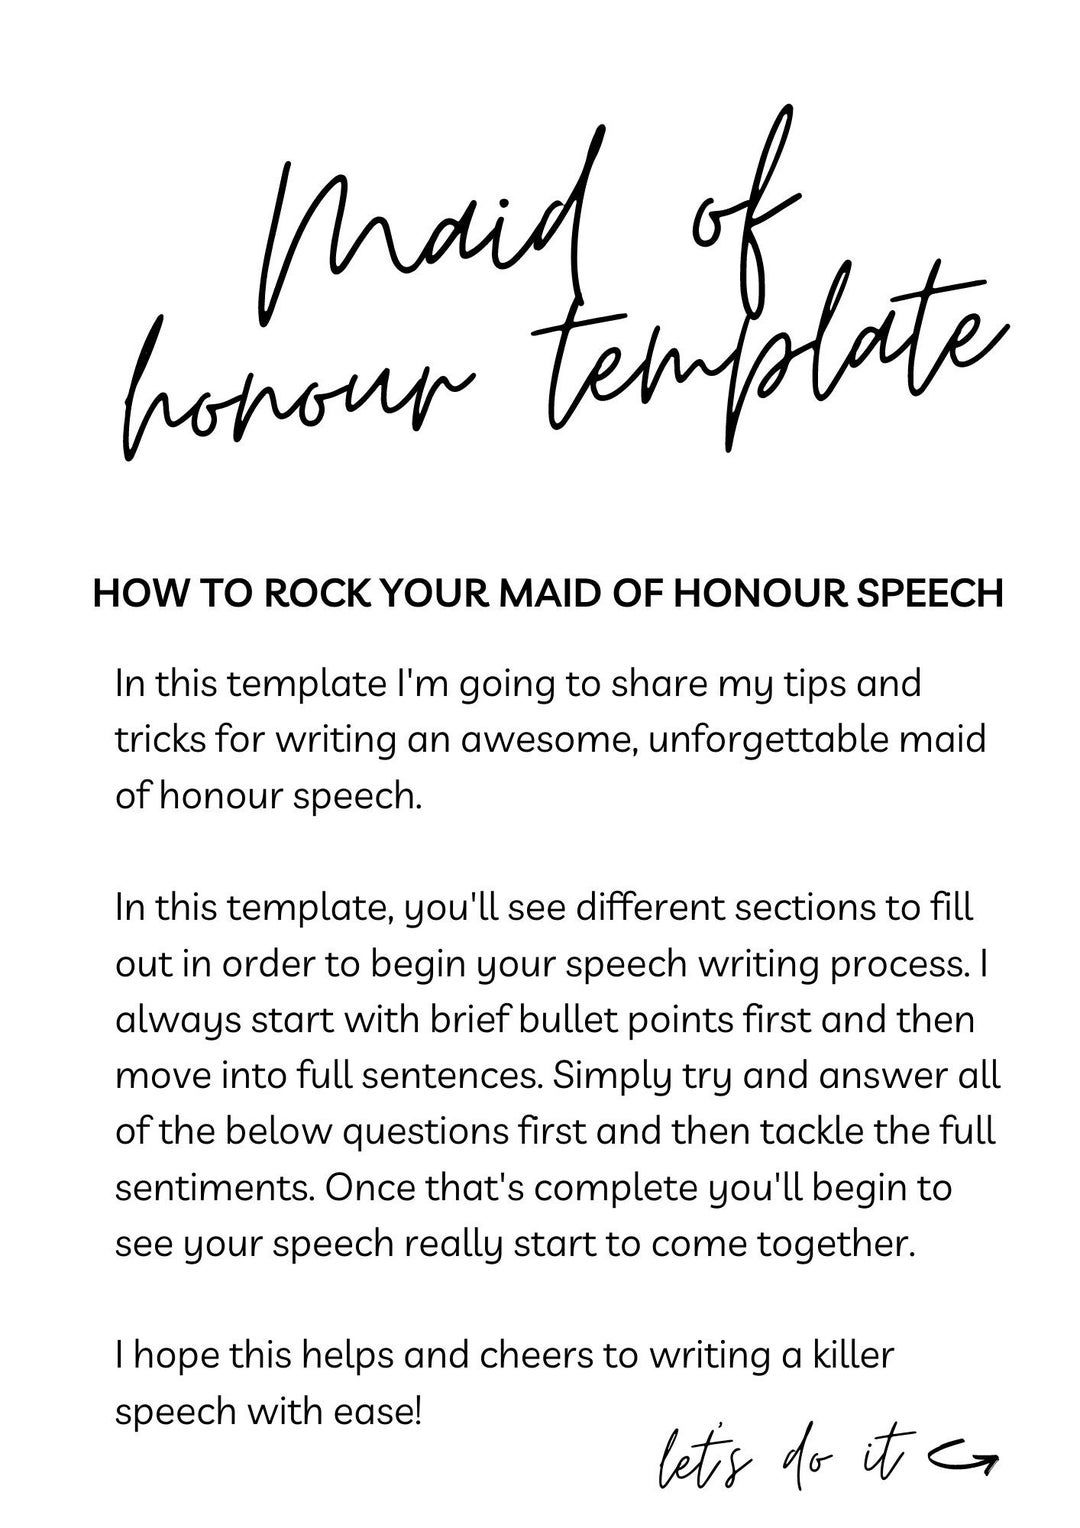 format for writing a maid of honor speech